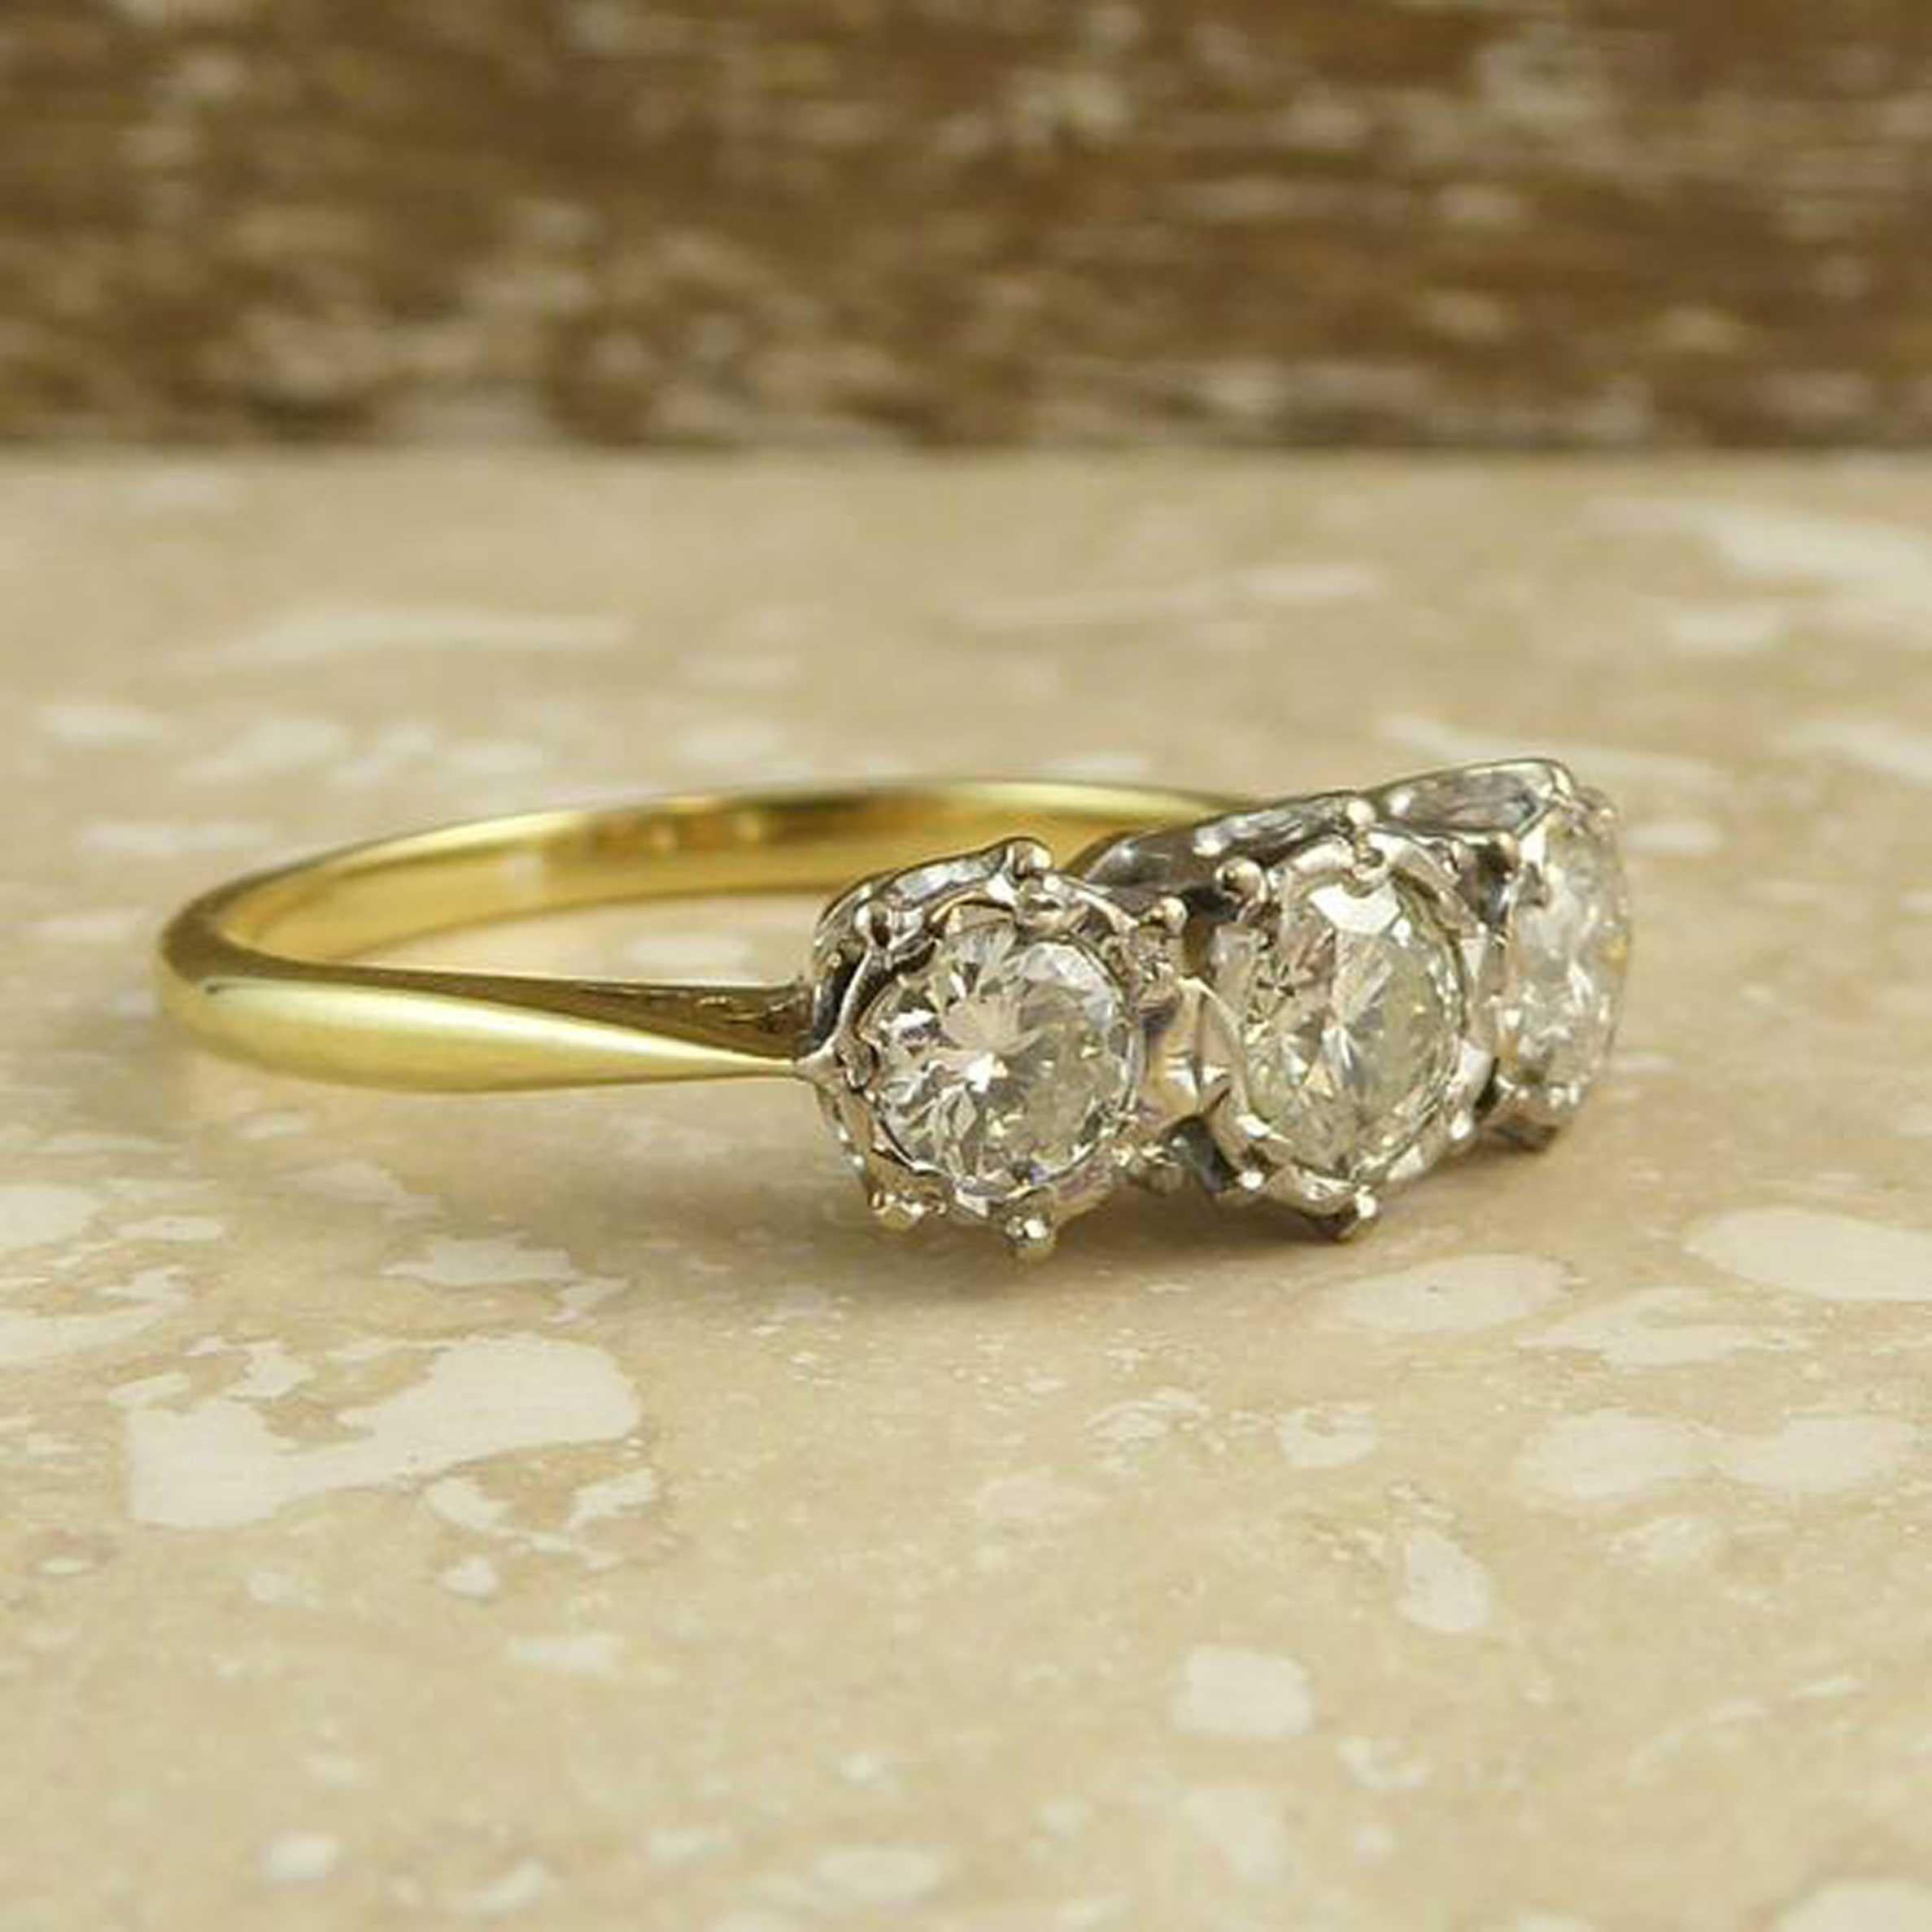 A lovely vintage 3 stone diamond engagement ring boasting three brilliant cut diamonds set in white gold surrounds and with  total carat weight of 0.50ct as stamped to the inside of the band.  This older version of the modern-day trilogy ring has a